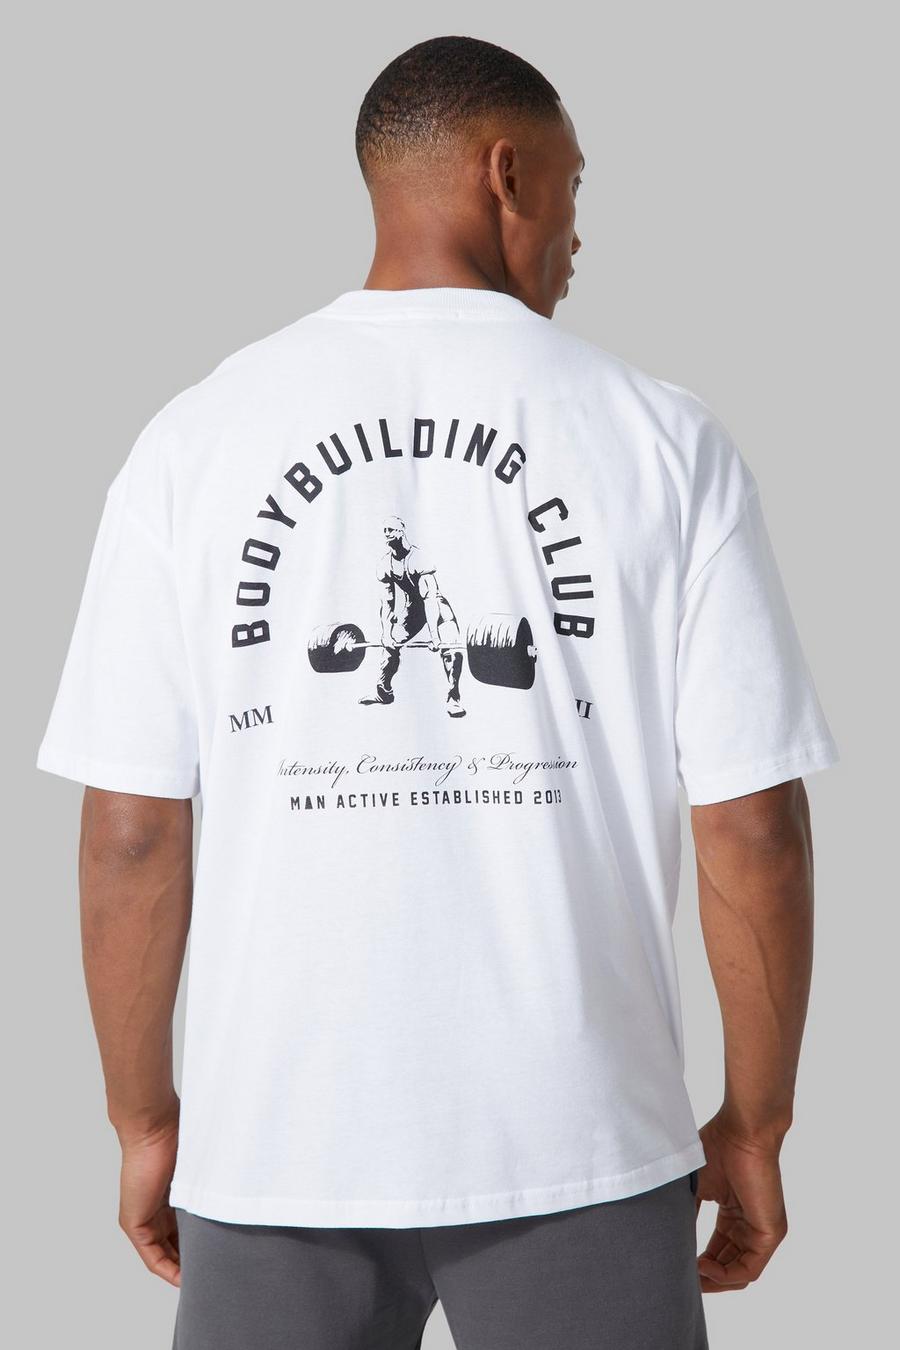 Man Active Oversize Body Building T-Shirt, White